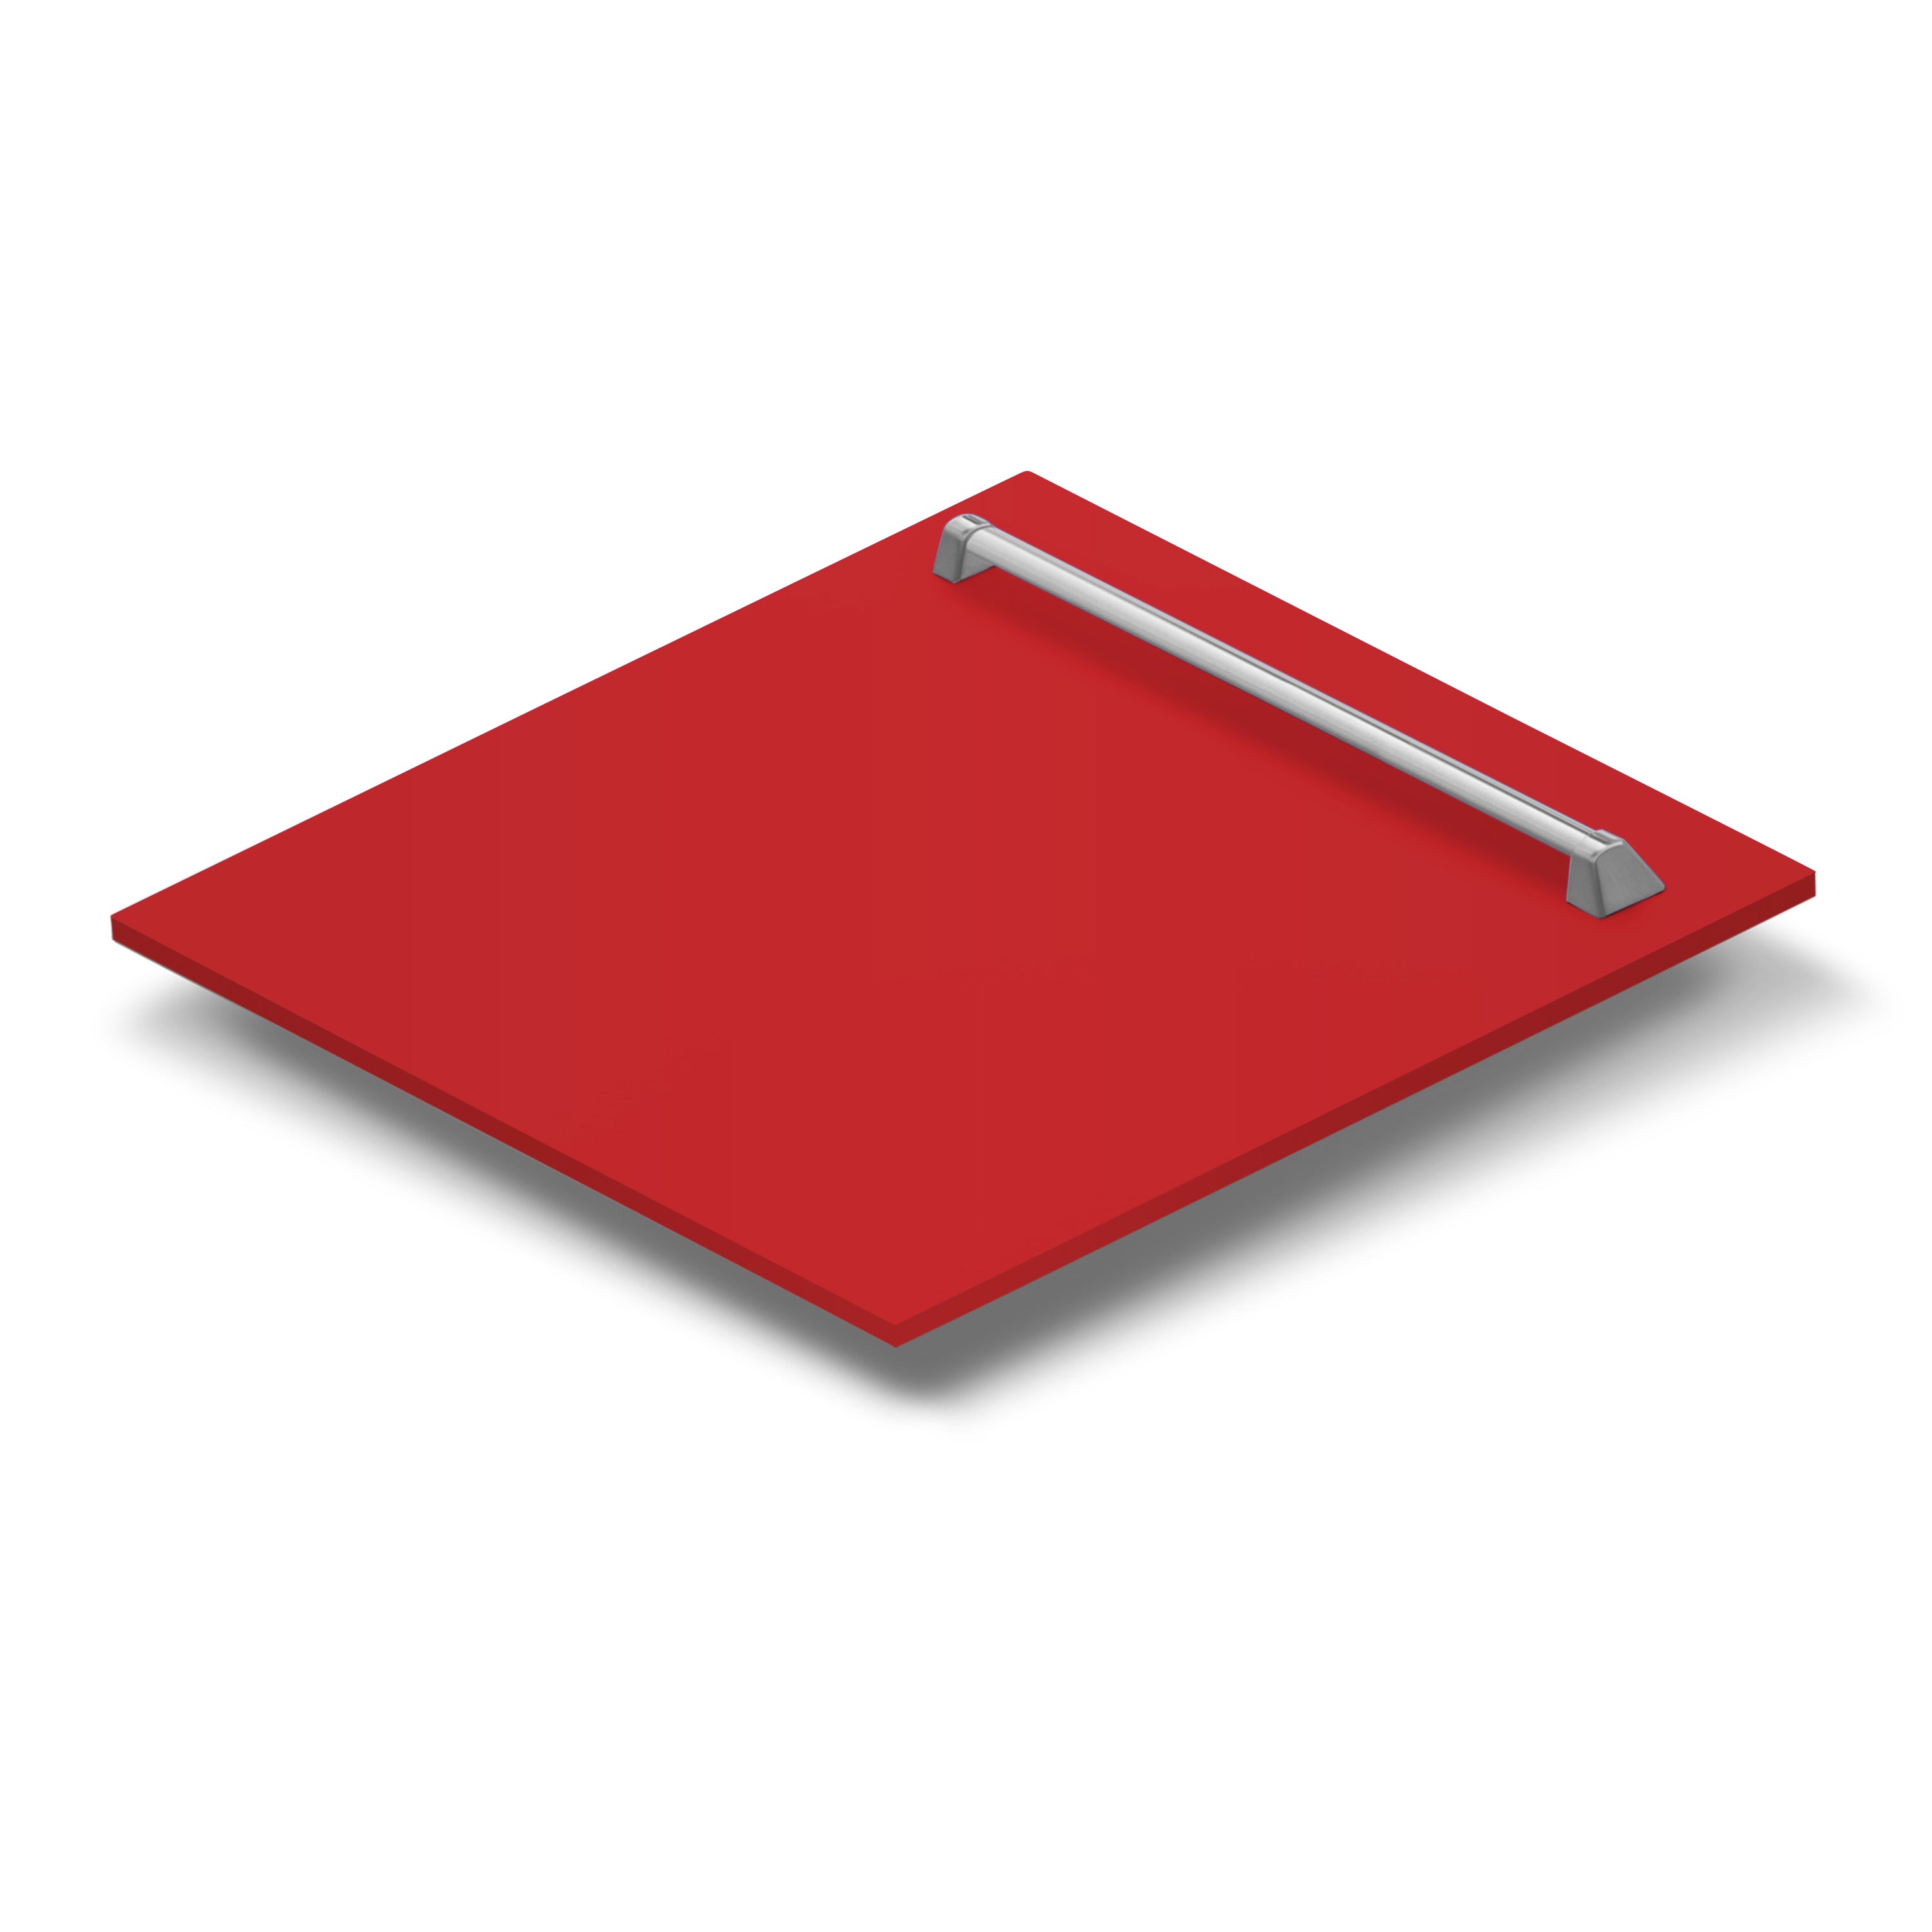 ZLINE 24" Monument Dishwasher Panel in Red Matte with Traditional Handle (DPMT-RM-24)